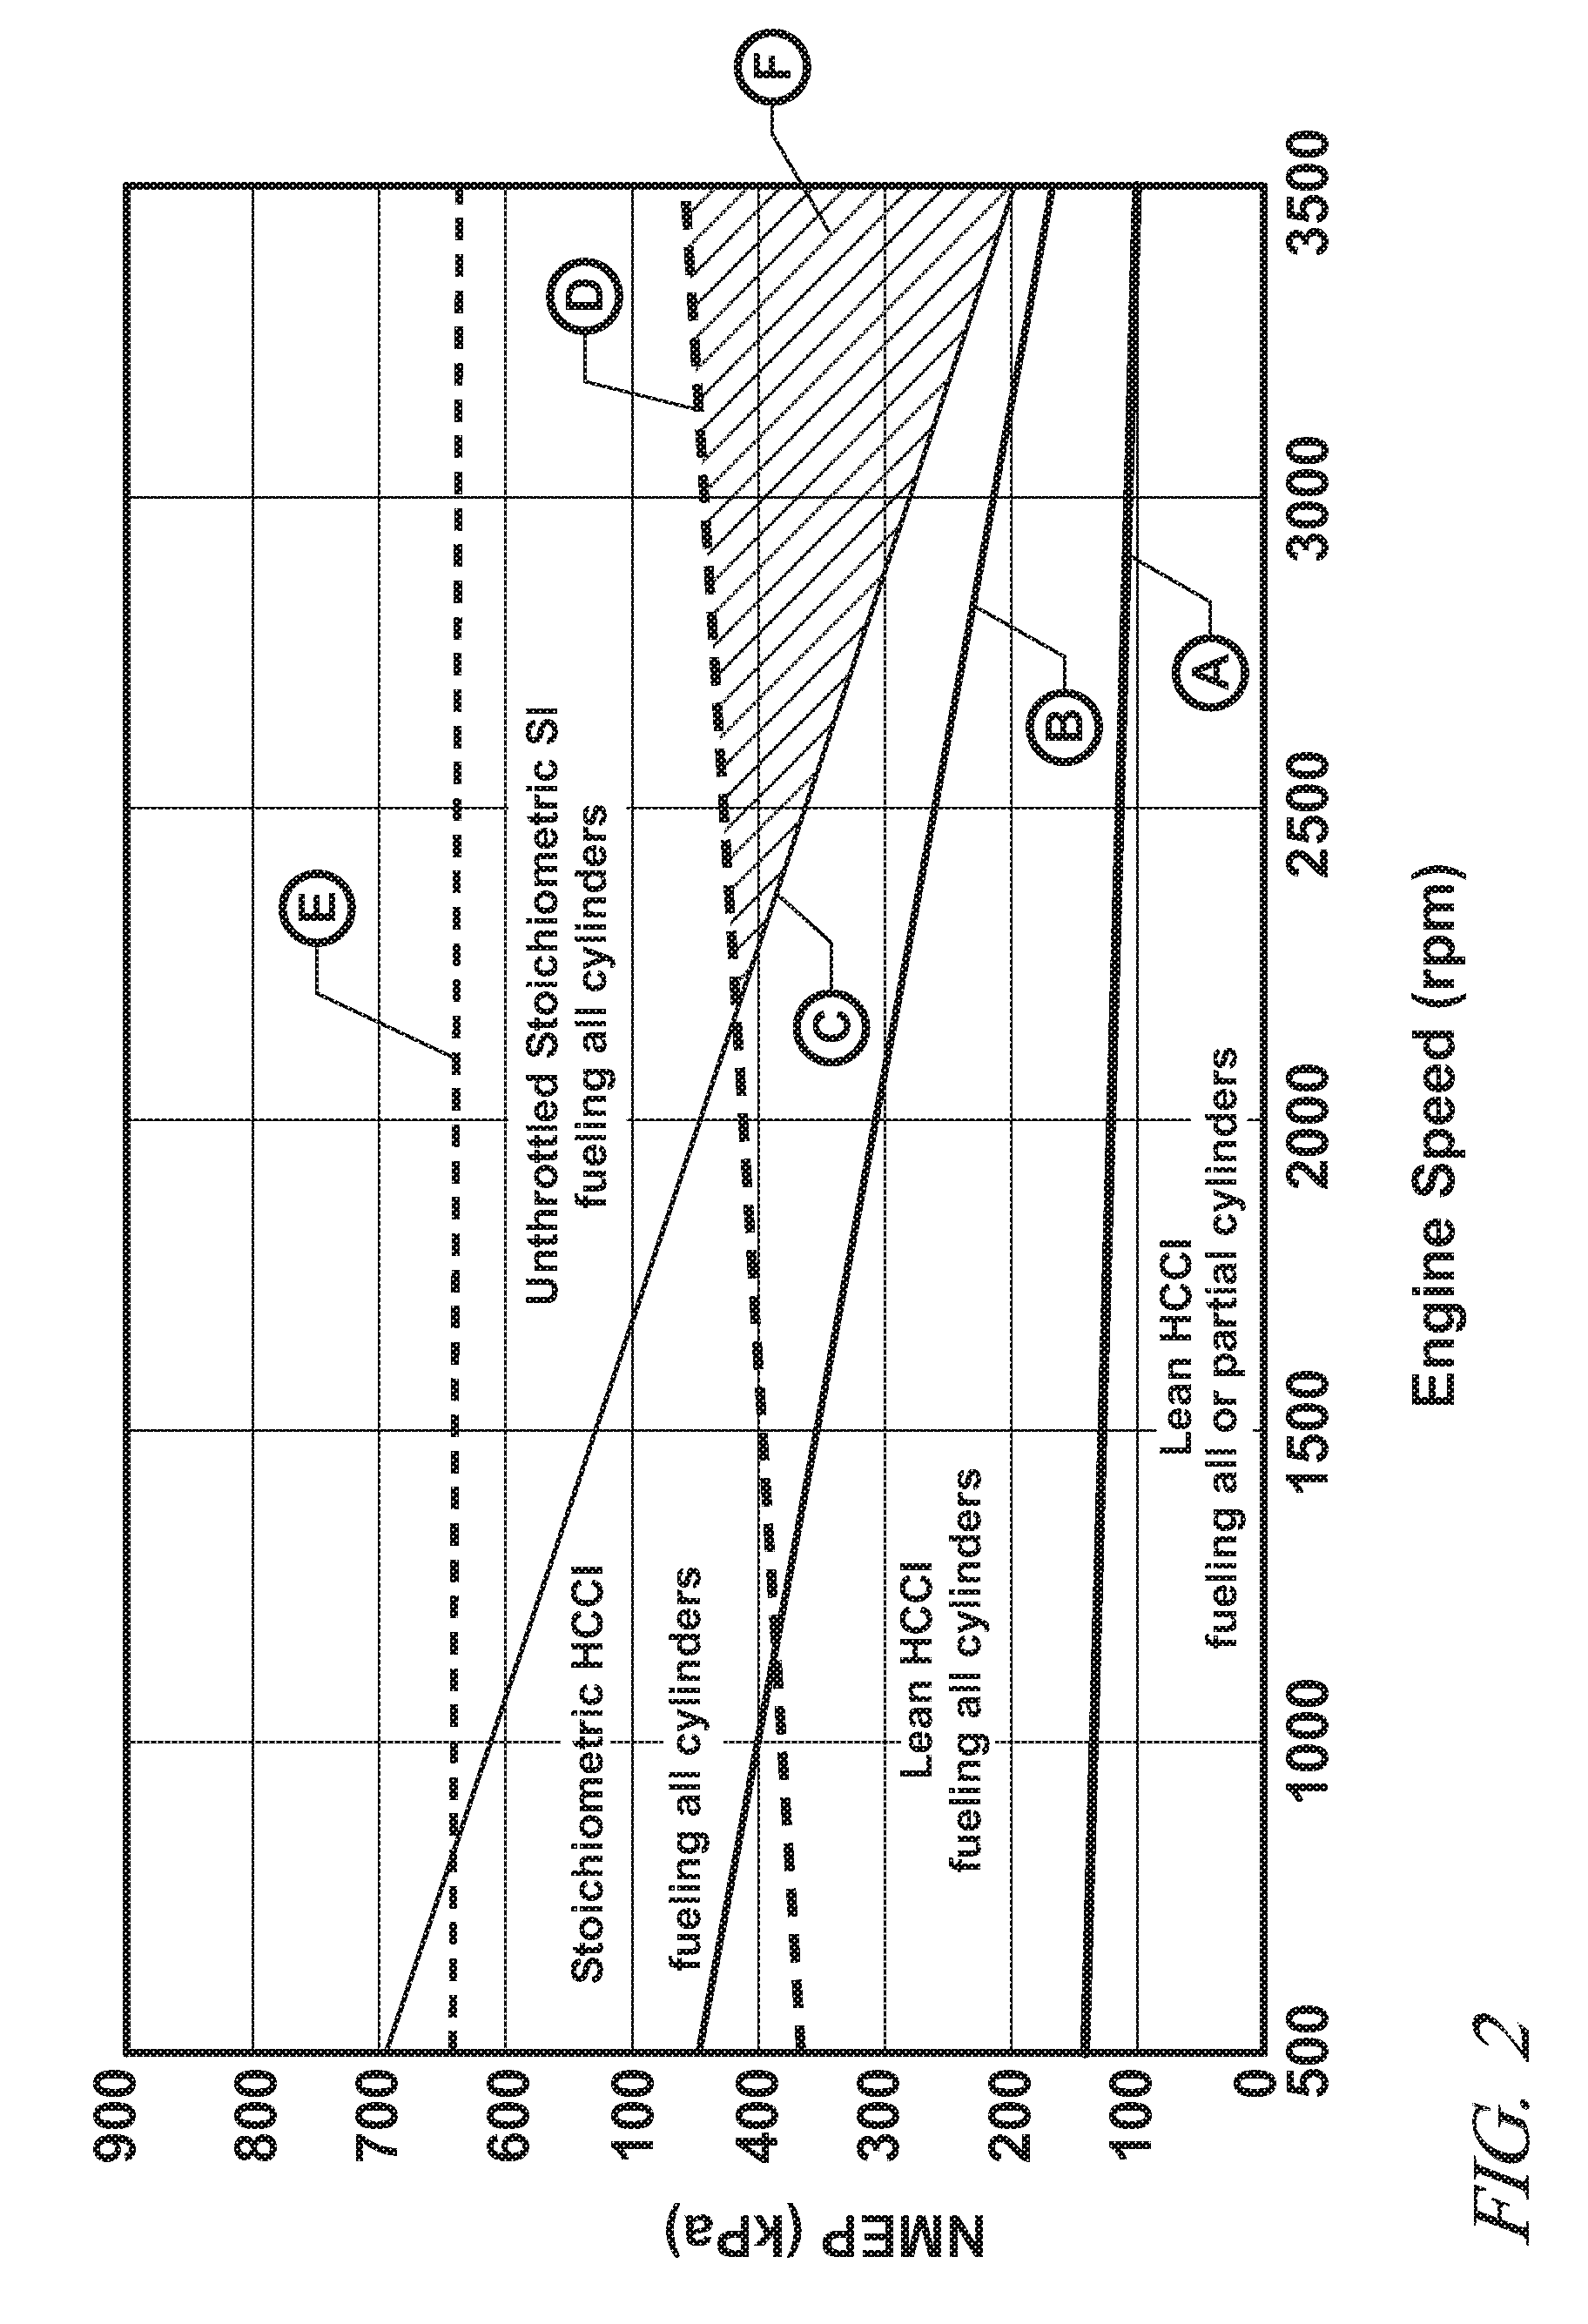 Method and apparatus to control a transition between HCCI and SI combustion in a direct-injection gasoline engine